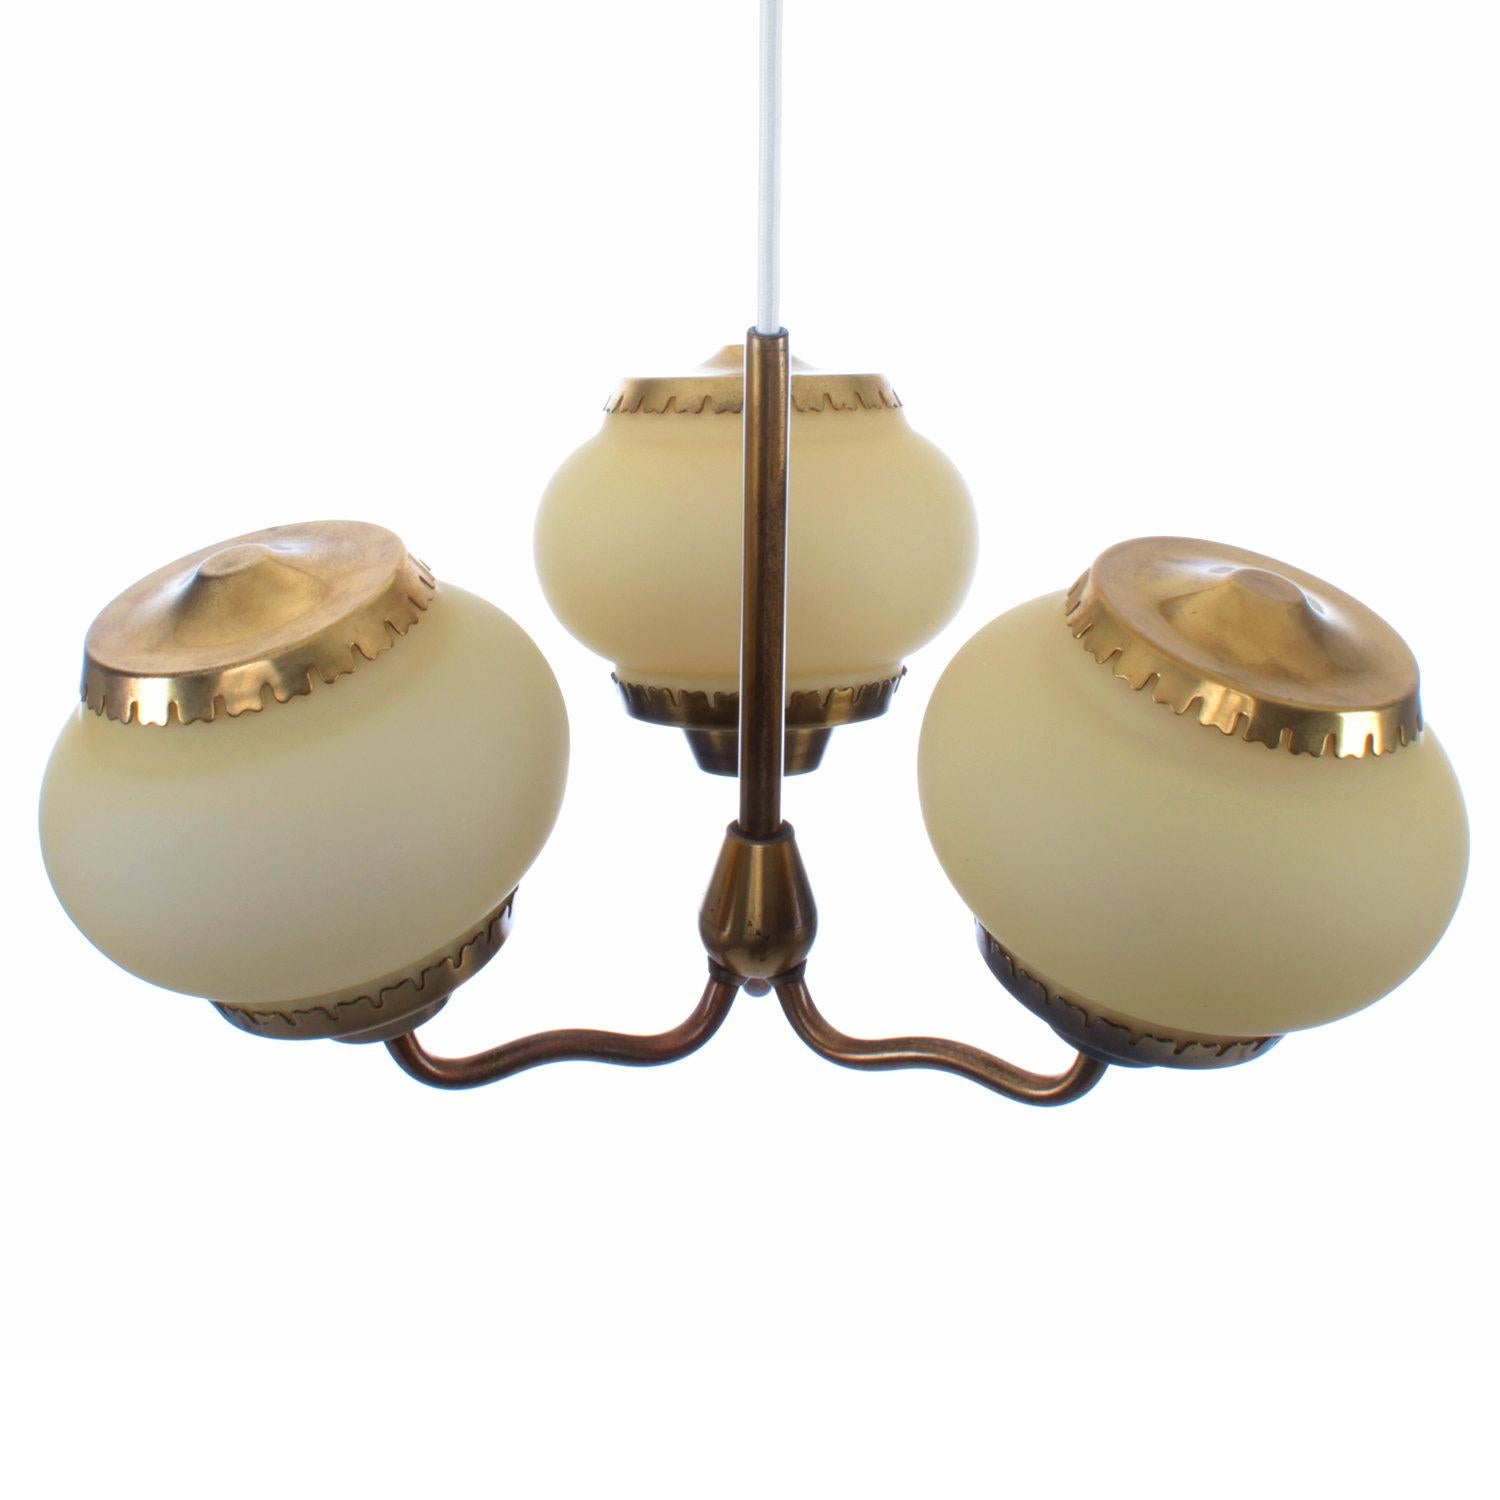 Chandelier by Bent Karlby Lyfa 1940s Beautiful Danish Modern Brass and Opal Lamp In Good Condition For Sale In Brondby, Copenhagen